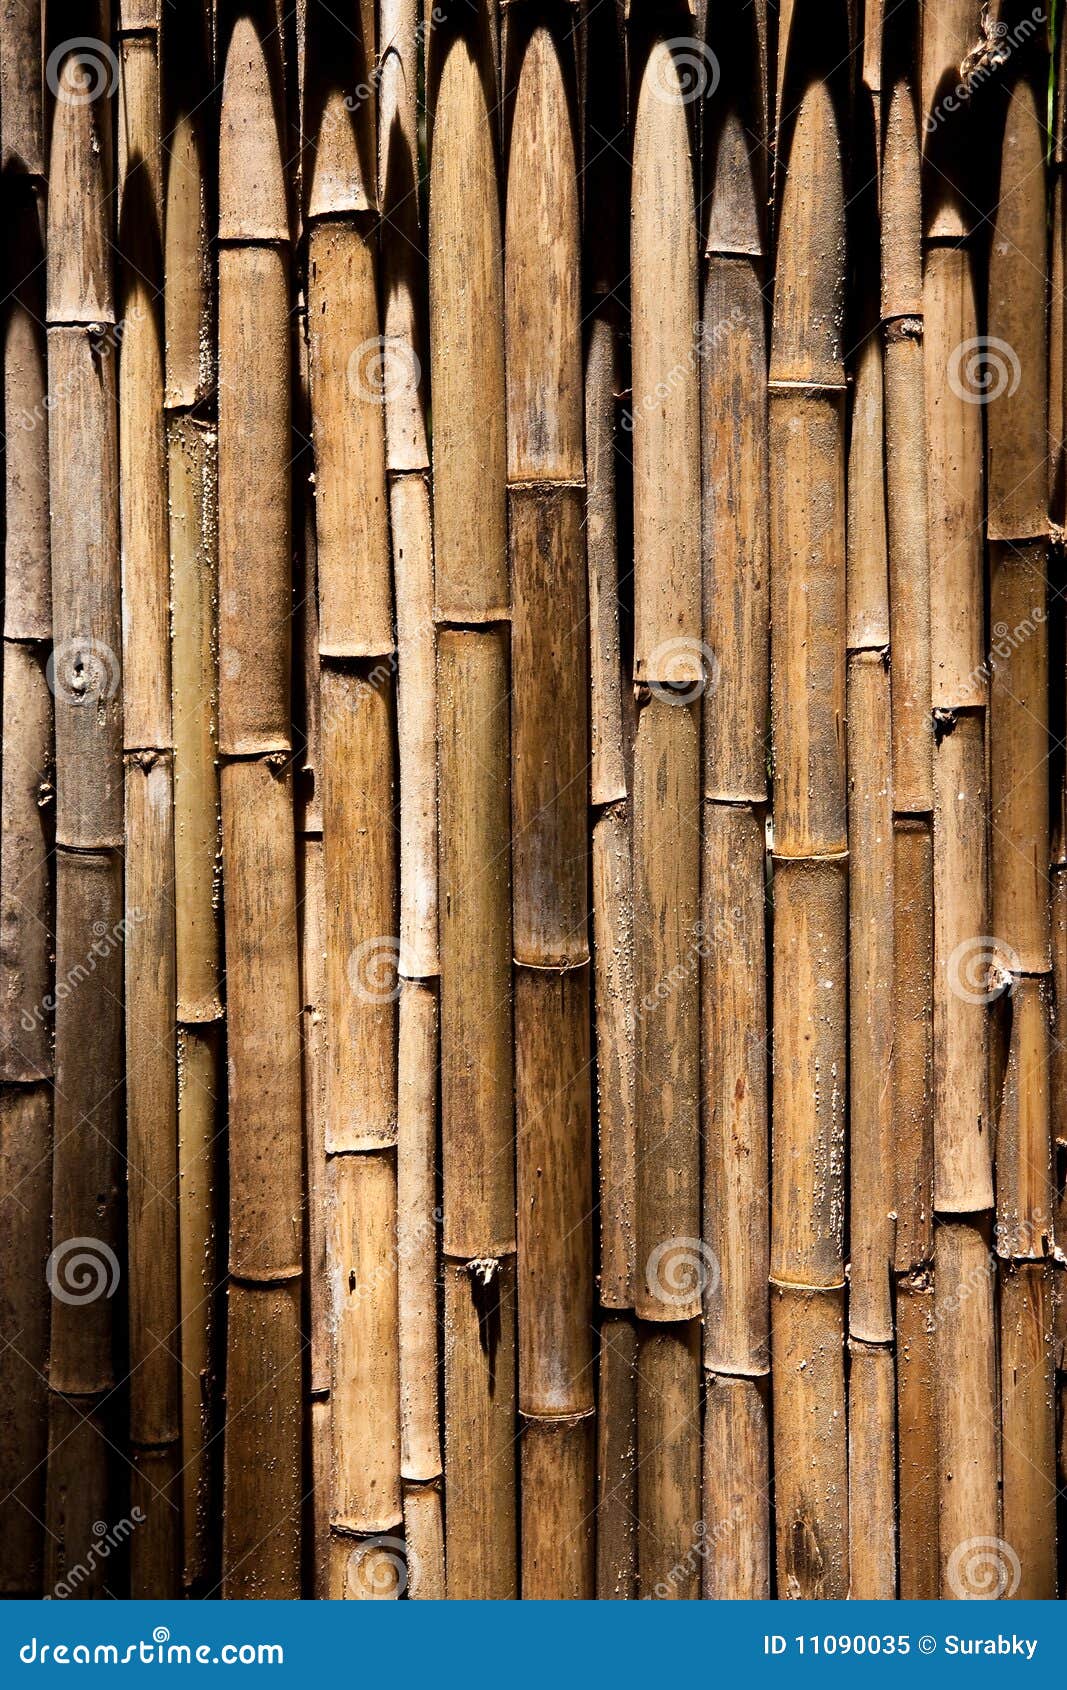  Bamboo  wall  stock image Image of line style abstract 